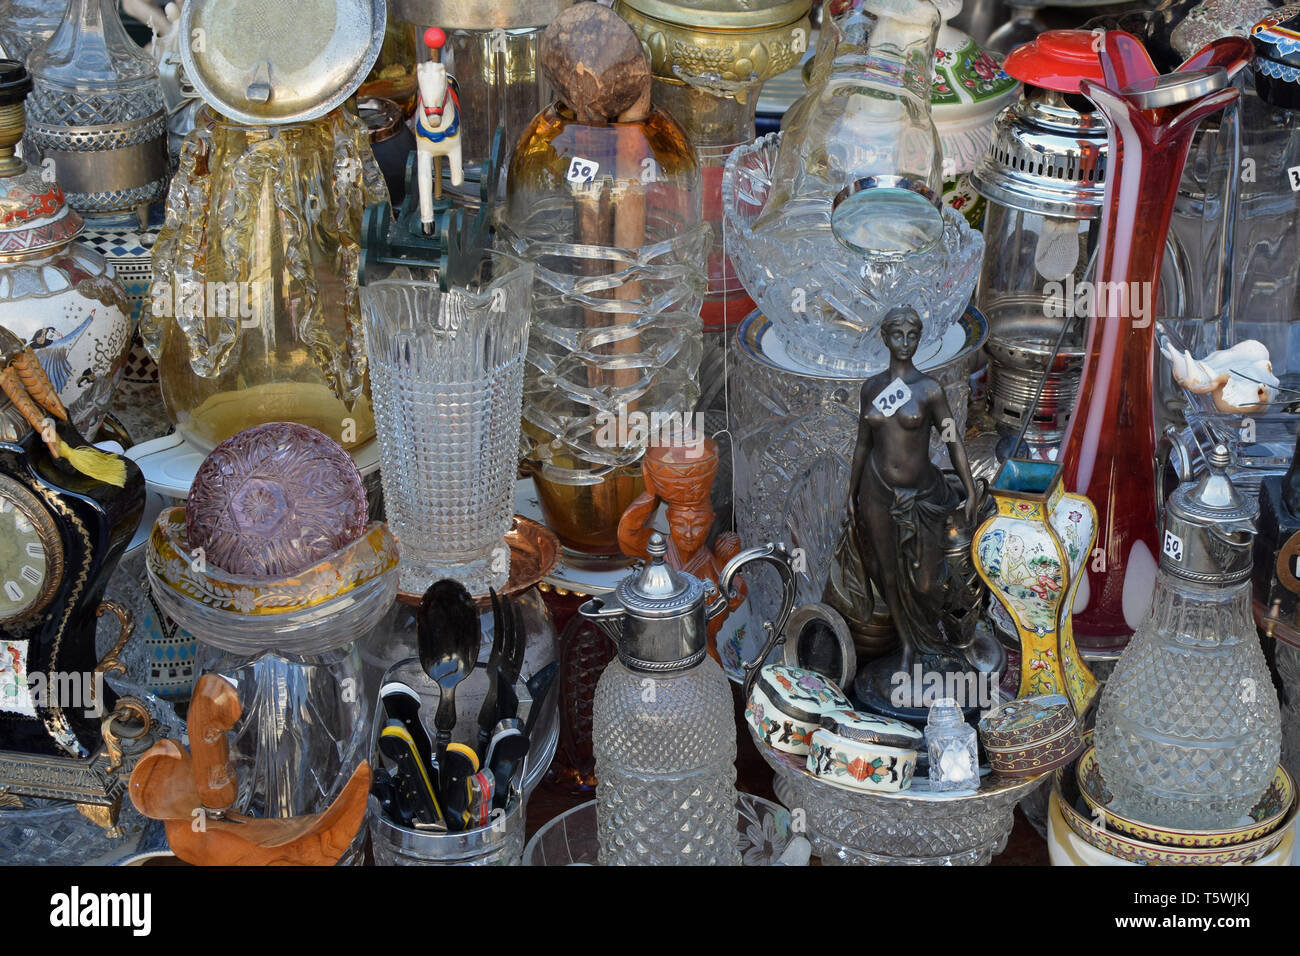 ATHENS, GREECE - OCTOBER 2, 2018: Vintage decorative objects for sale at antiques store. Stock Photo